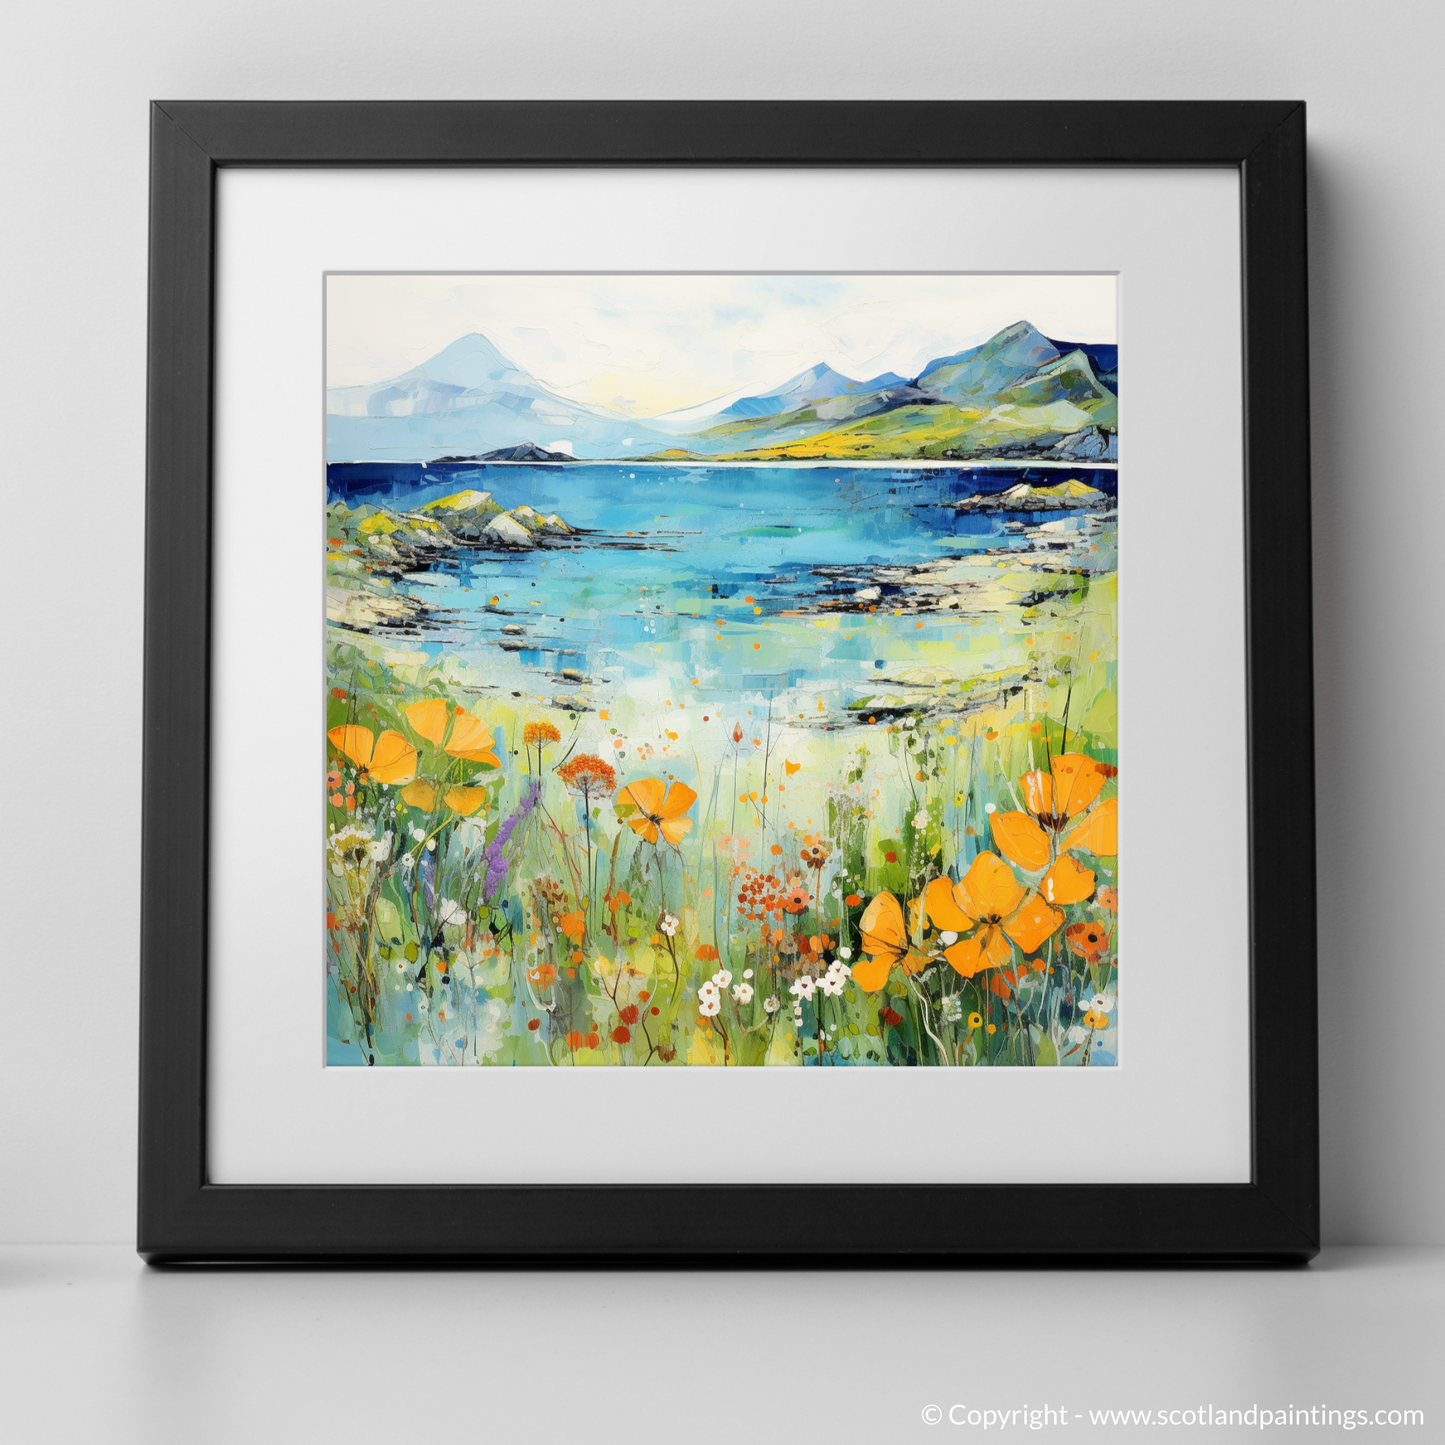 Art Print of Isle of Raasay, Inner Hebrides in summer with a black frame